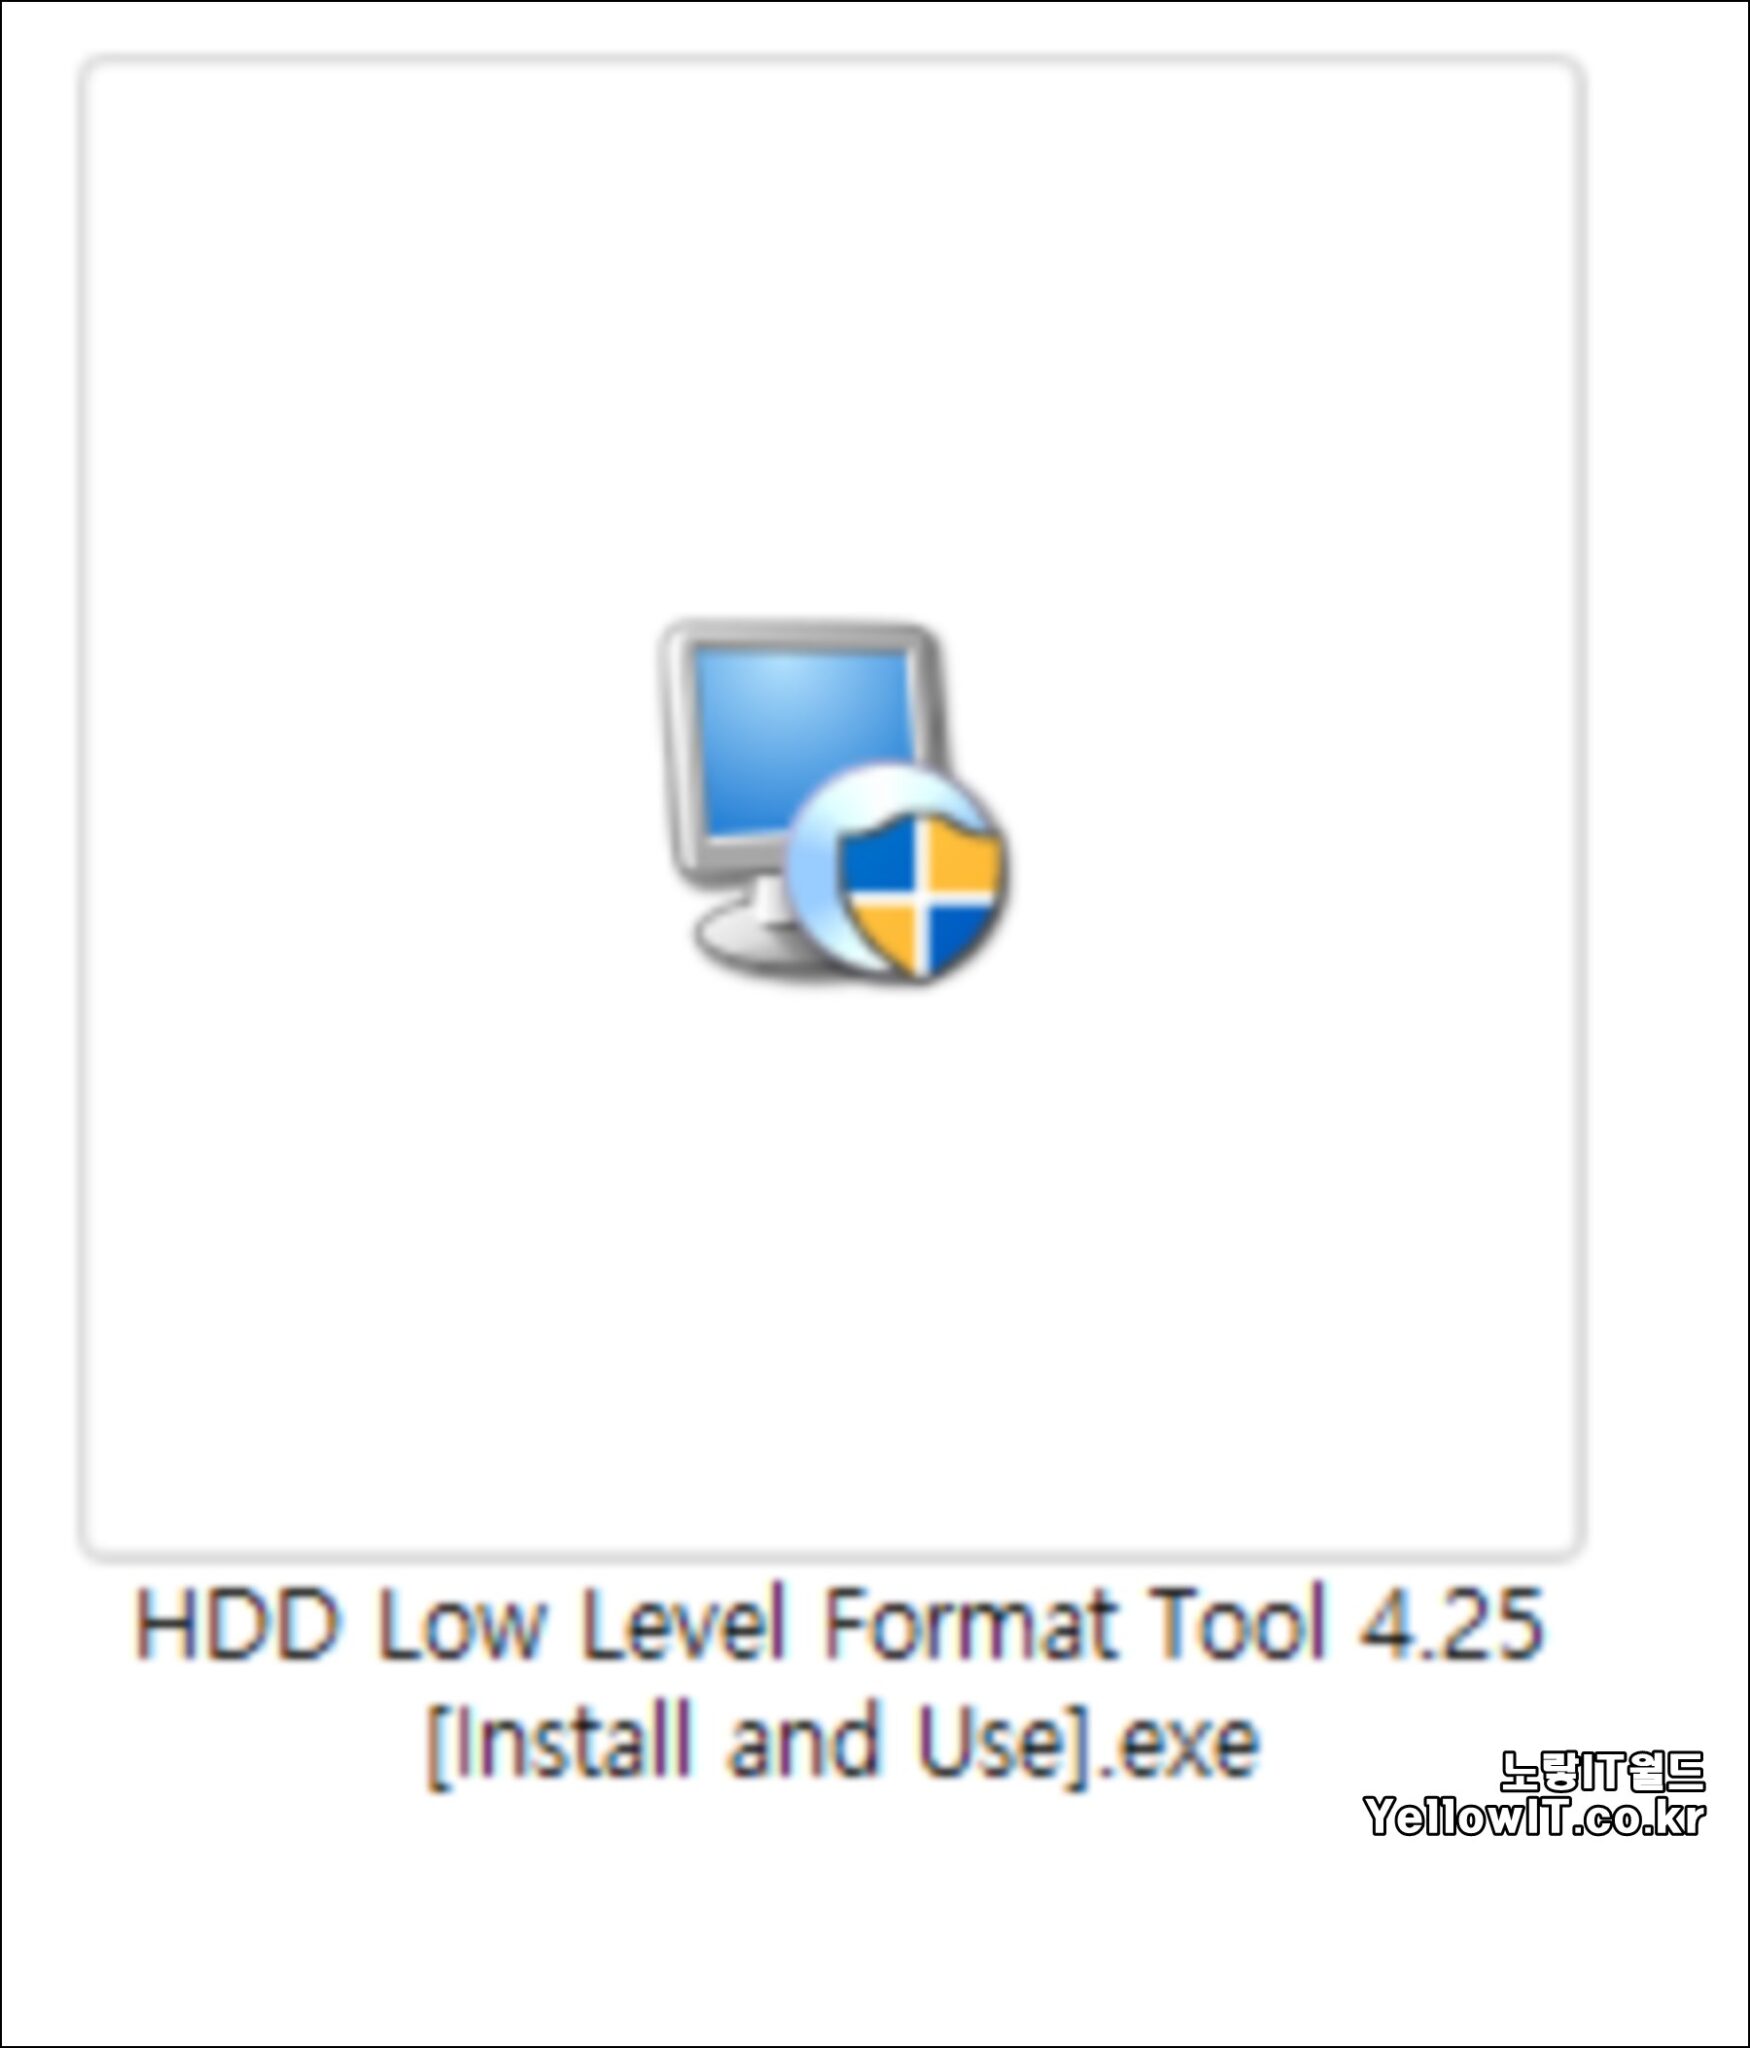 HDD Low Level Format Tool 4.25